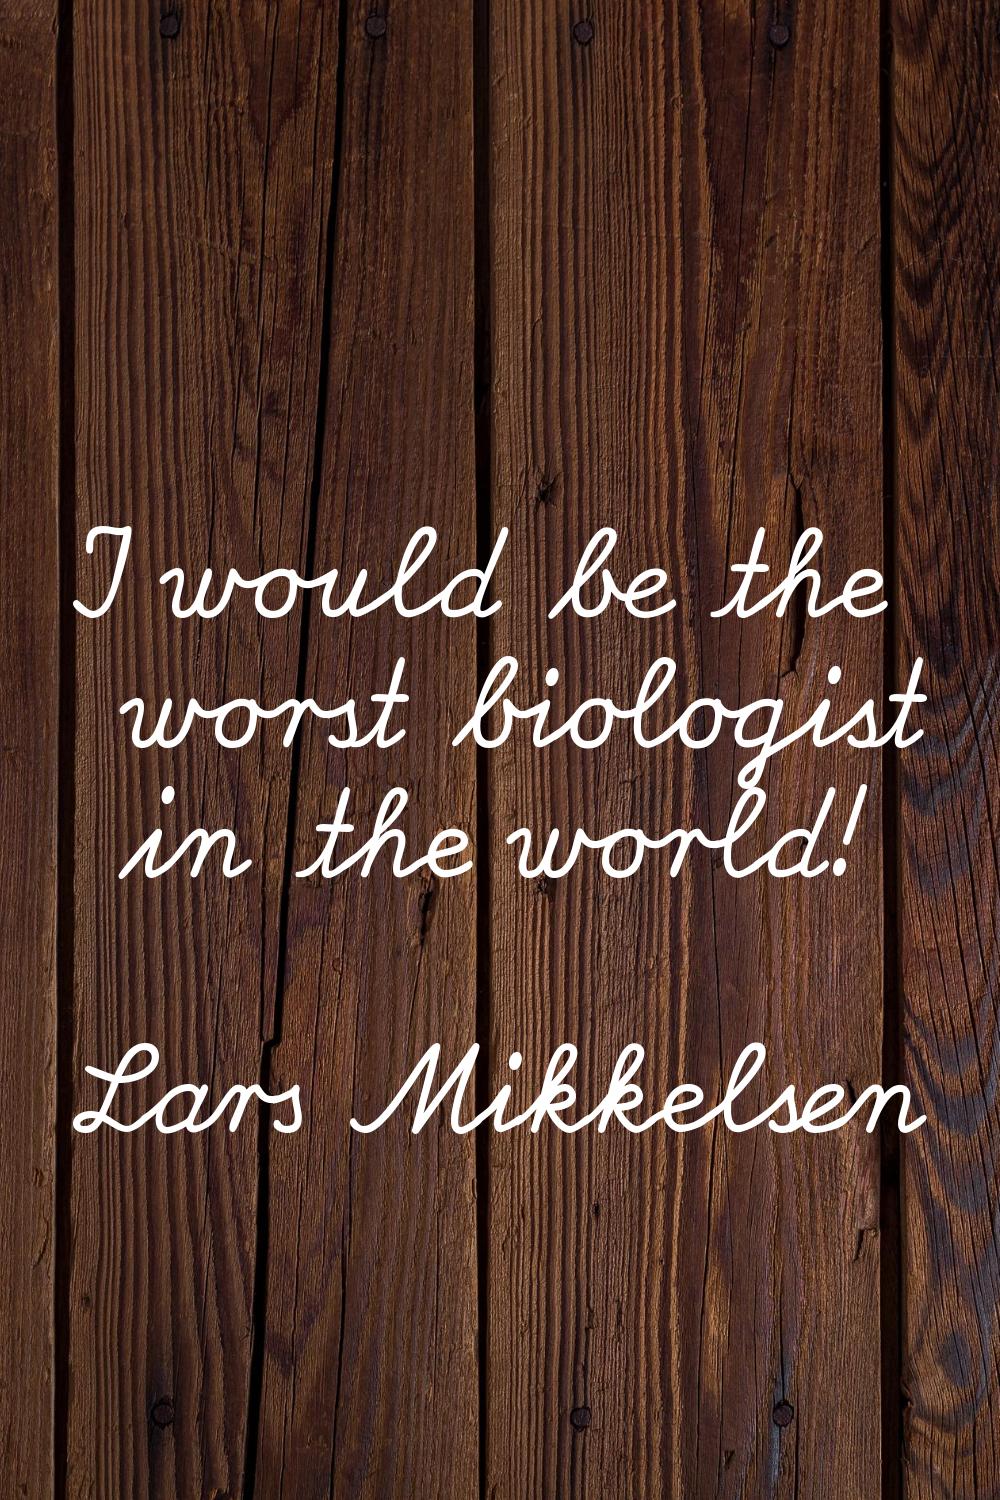 I would be the worst biologist in the world!